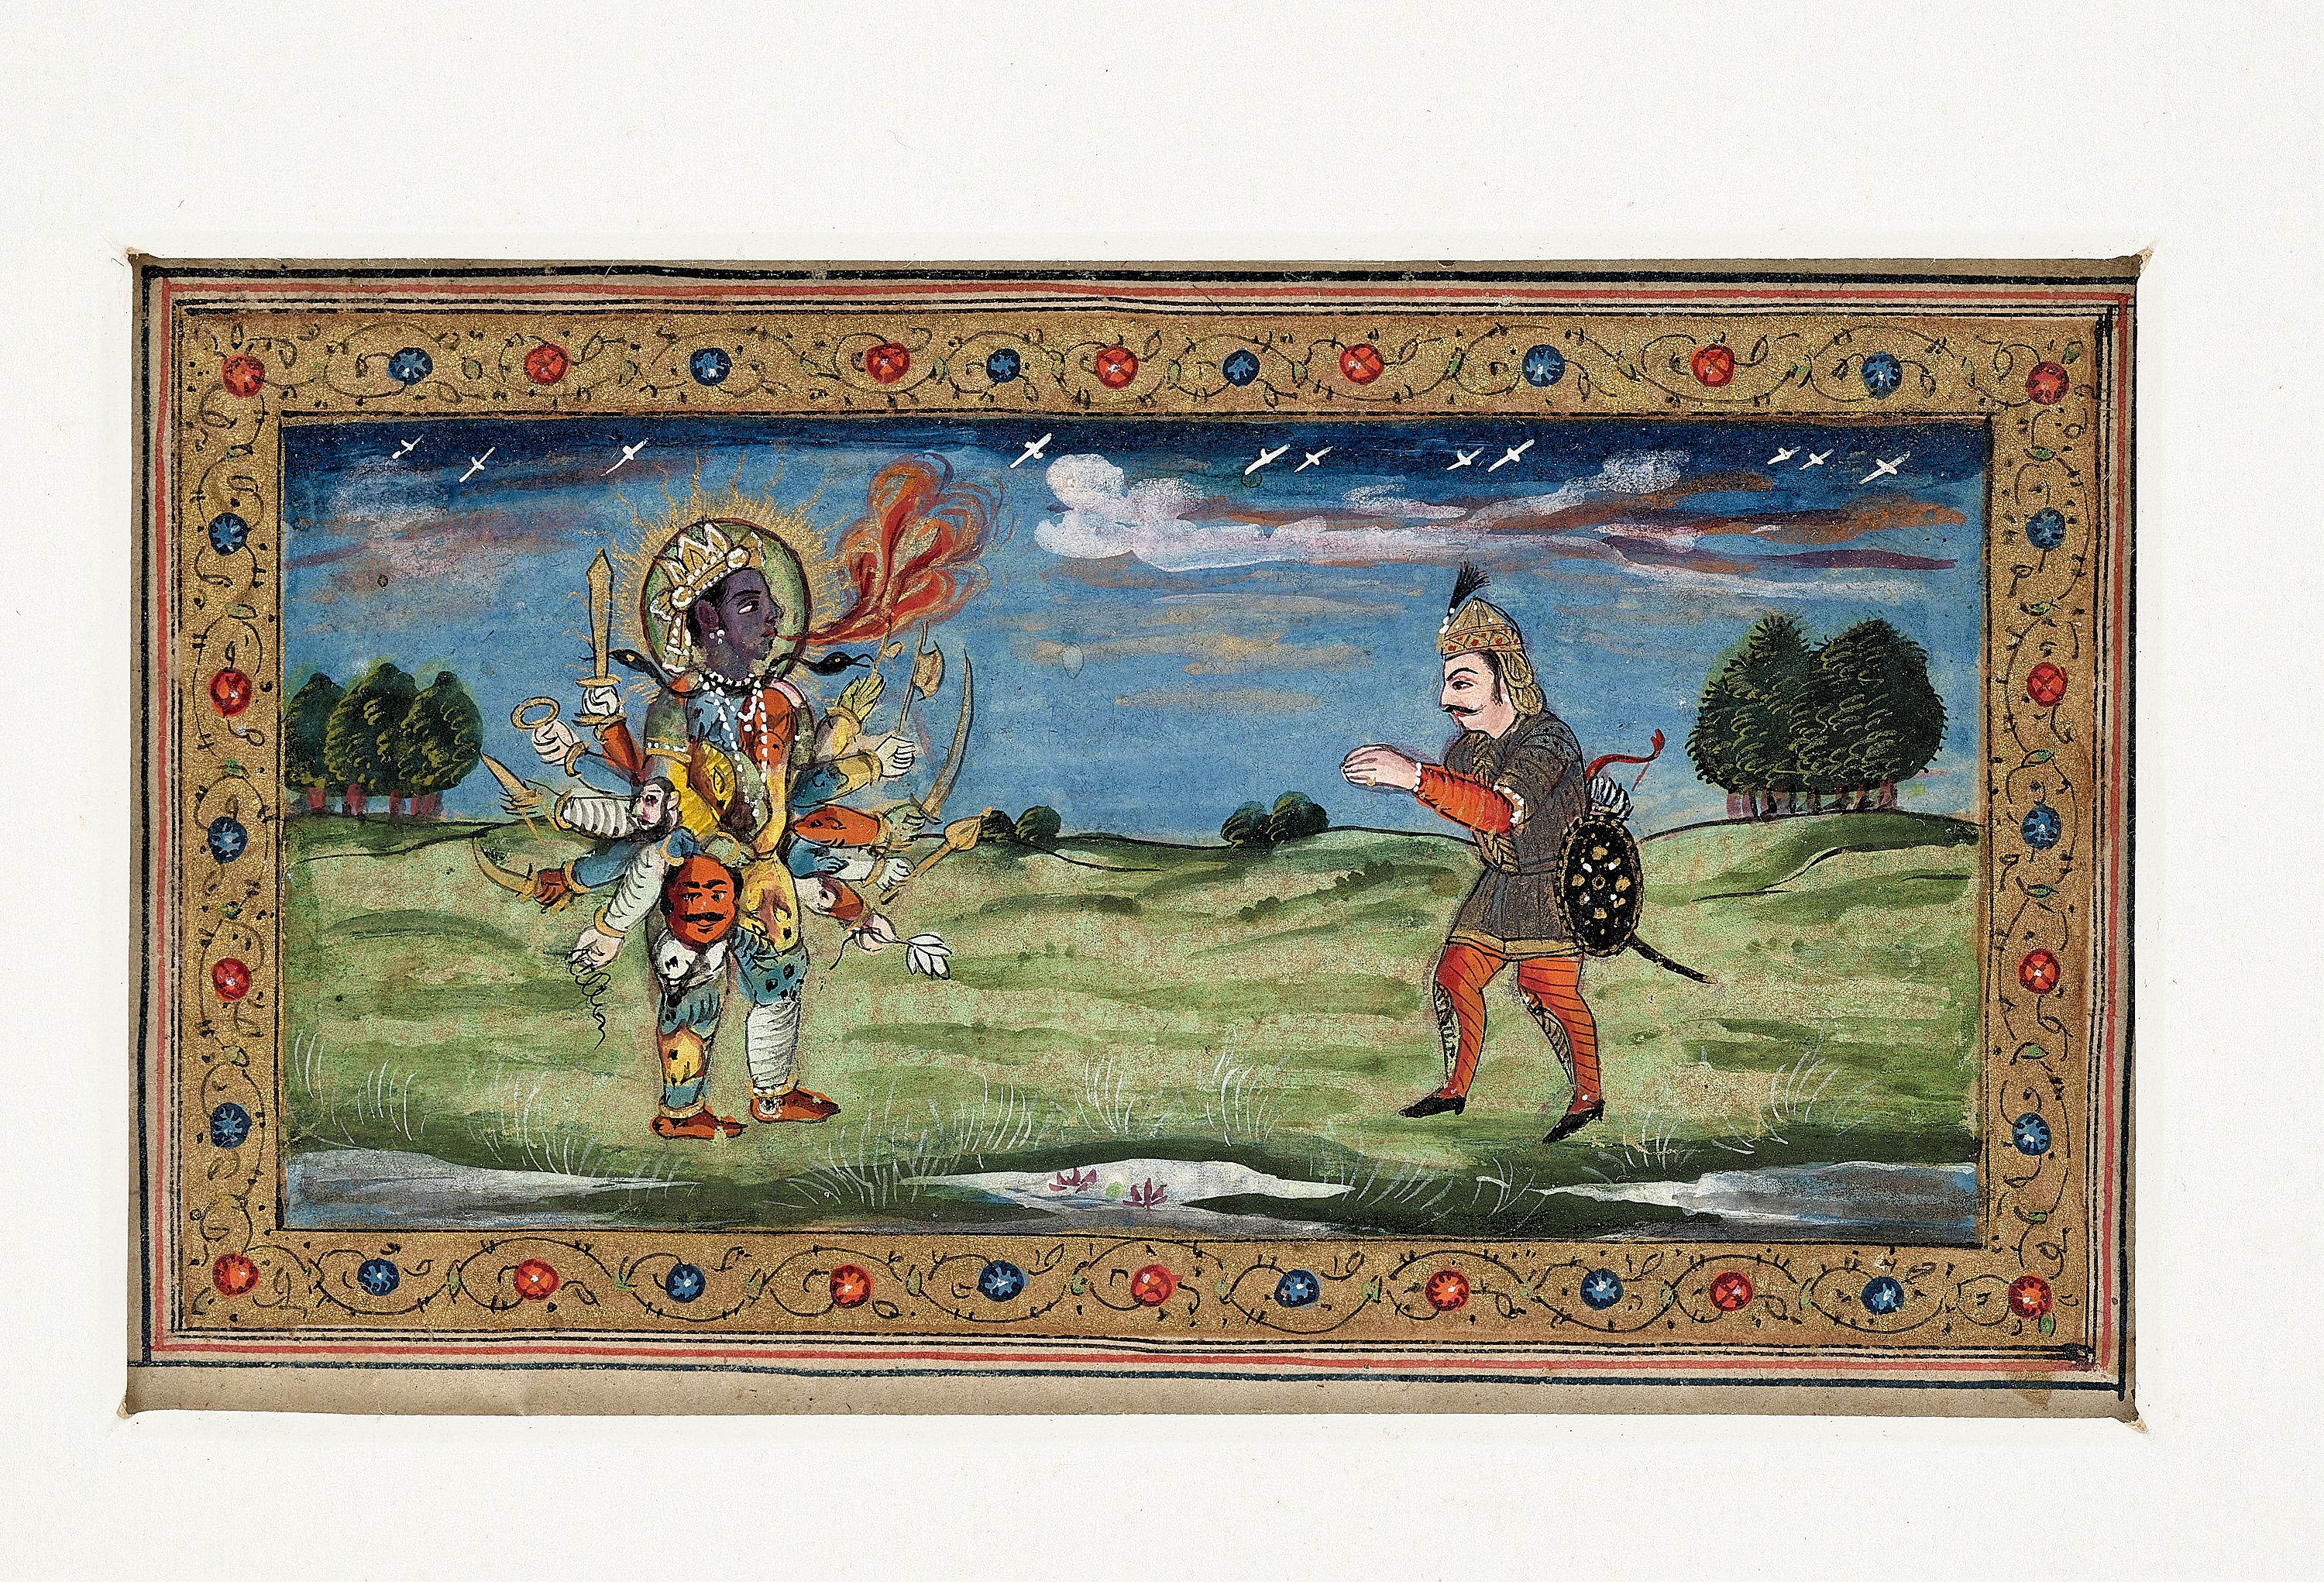 A RARE GROUP OF 27 FOLIOS FROM A MANUSCRIPT, KASHMIR 18TH CENTURY - Image 2 of 20